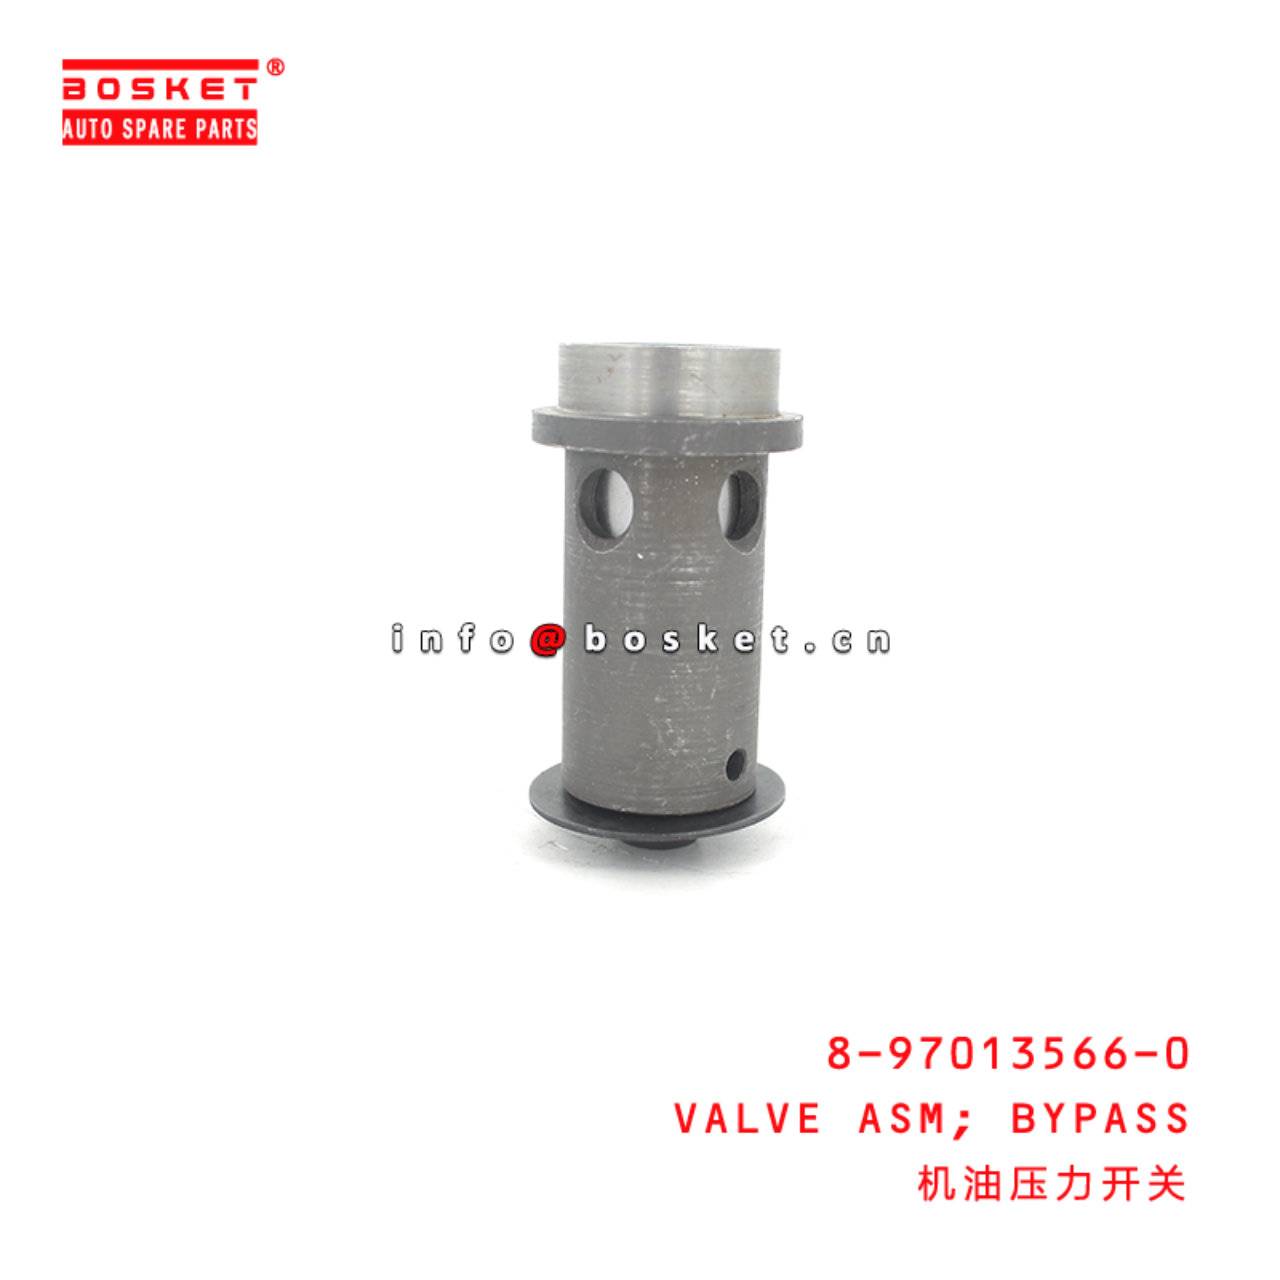 8-97013566-0 Bypass Valve Assembly Suitable for ISUZU NKR 8970135660